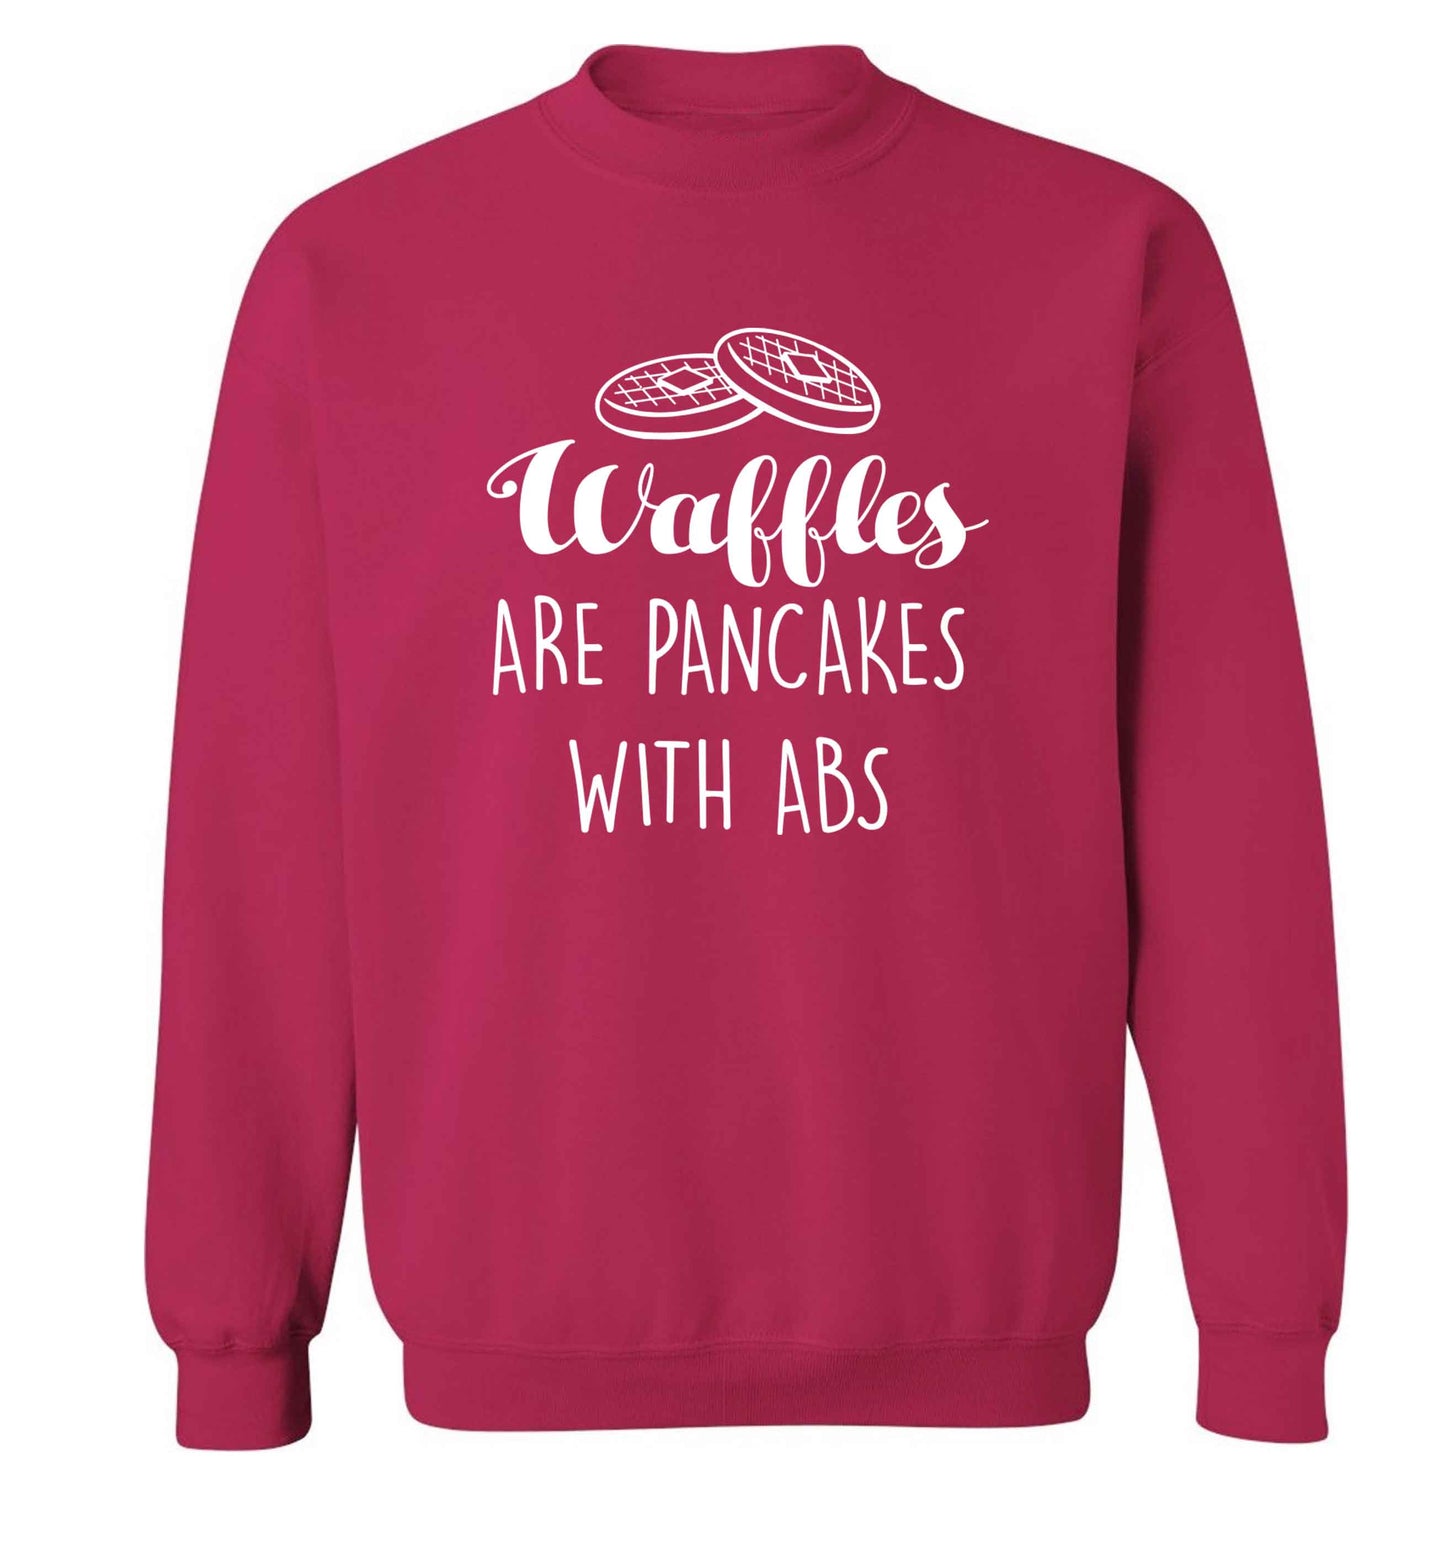 Waffles are just pancakes with abs adult's unisex pink sweater 2XL